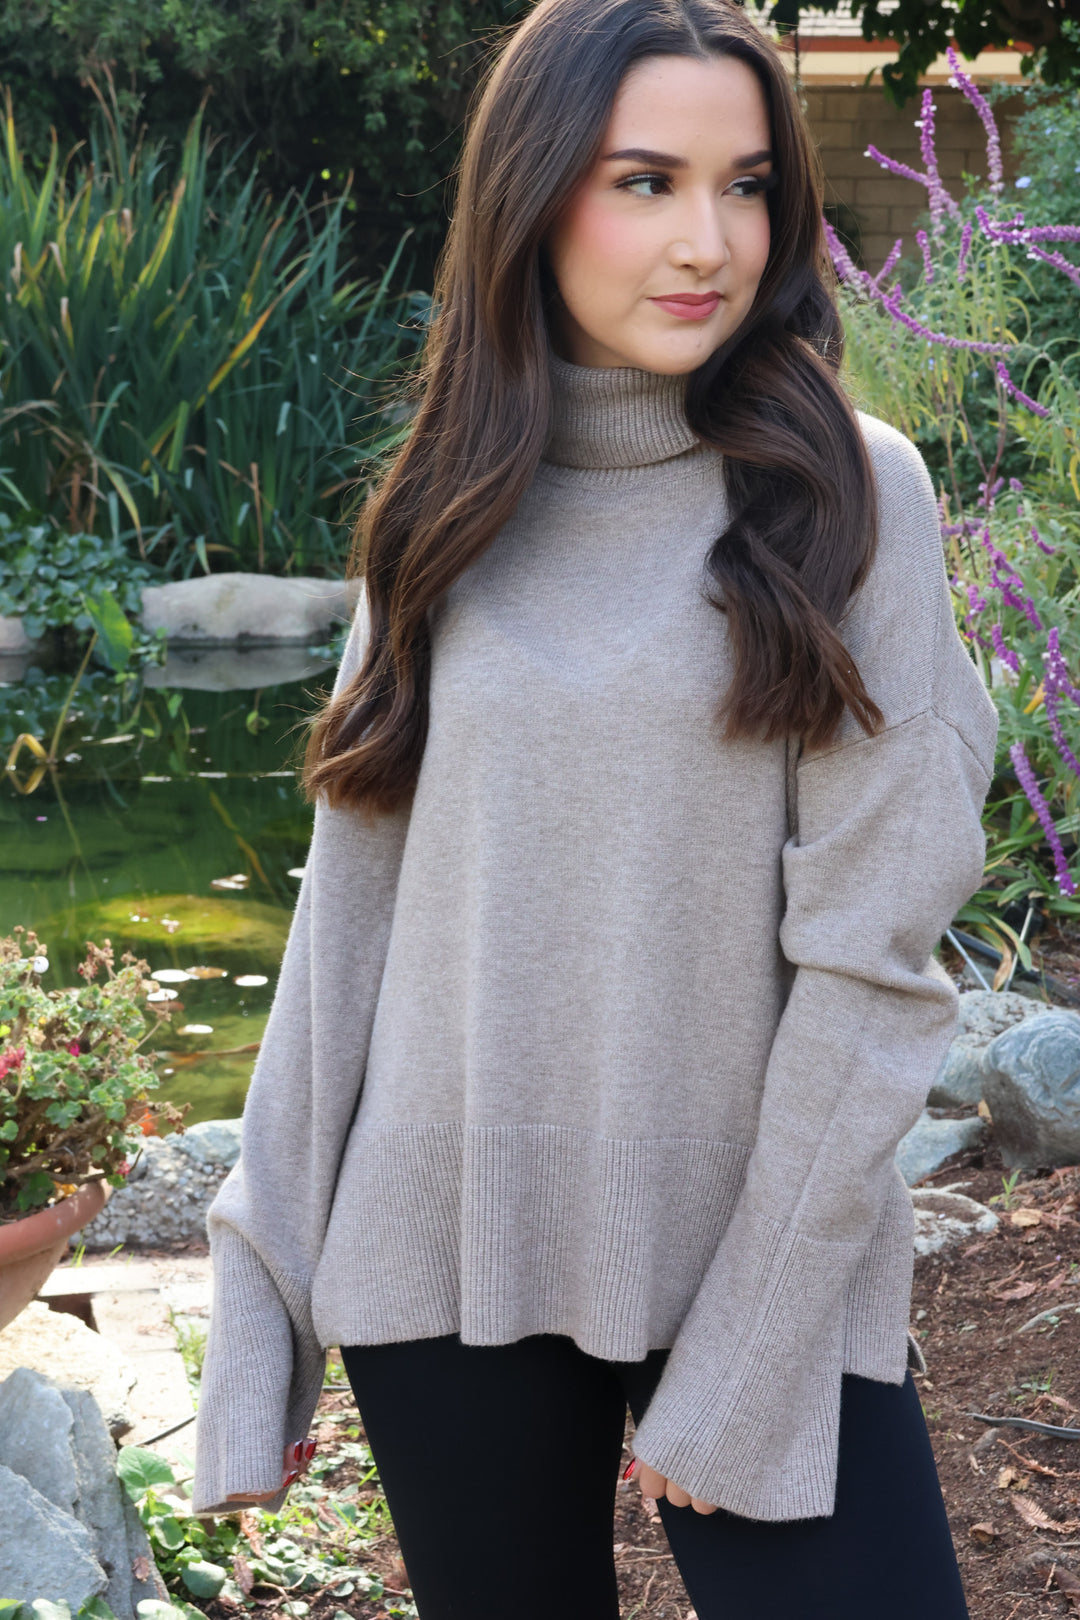 Comfy Moment Sweater in Mocha - ShopSpoiled